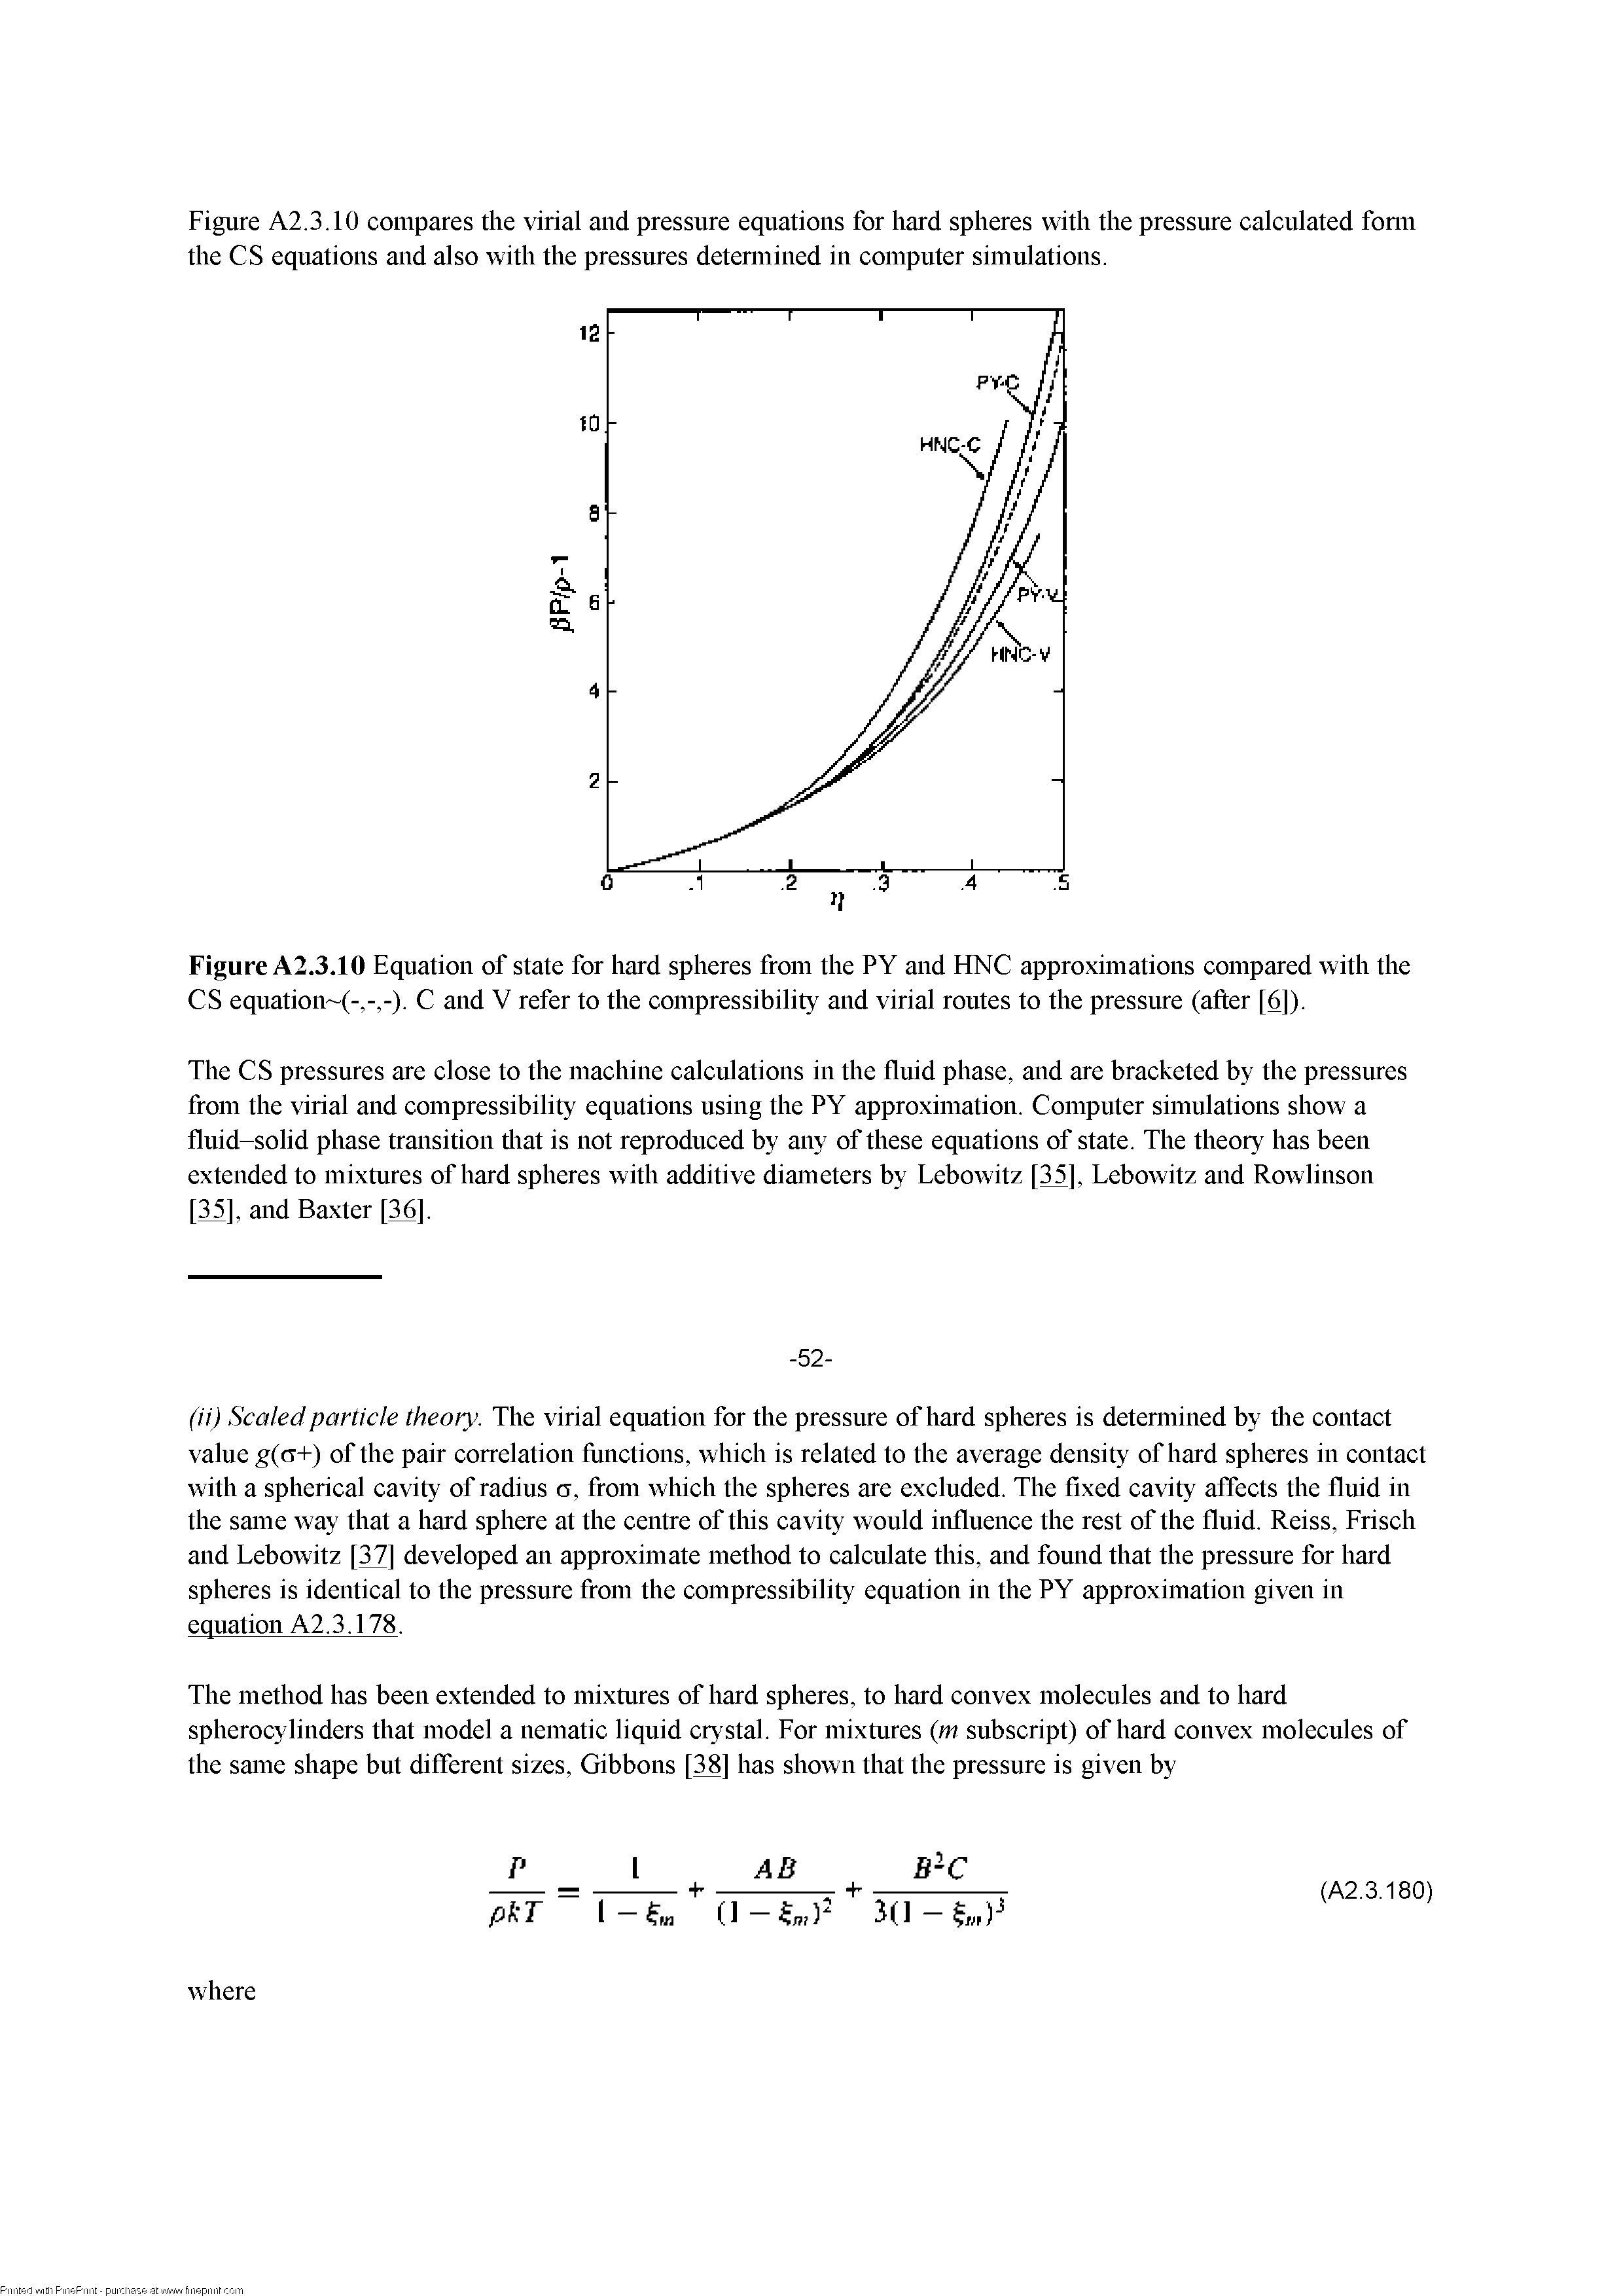 Figure A2.3.10 compares the virial and pressure equations for hard spheres with the pressure calculated fonu the CS equations and also with the pressures detemiined in computer simulations.